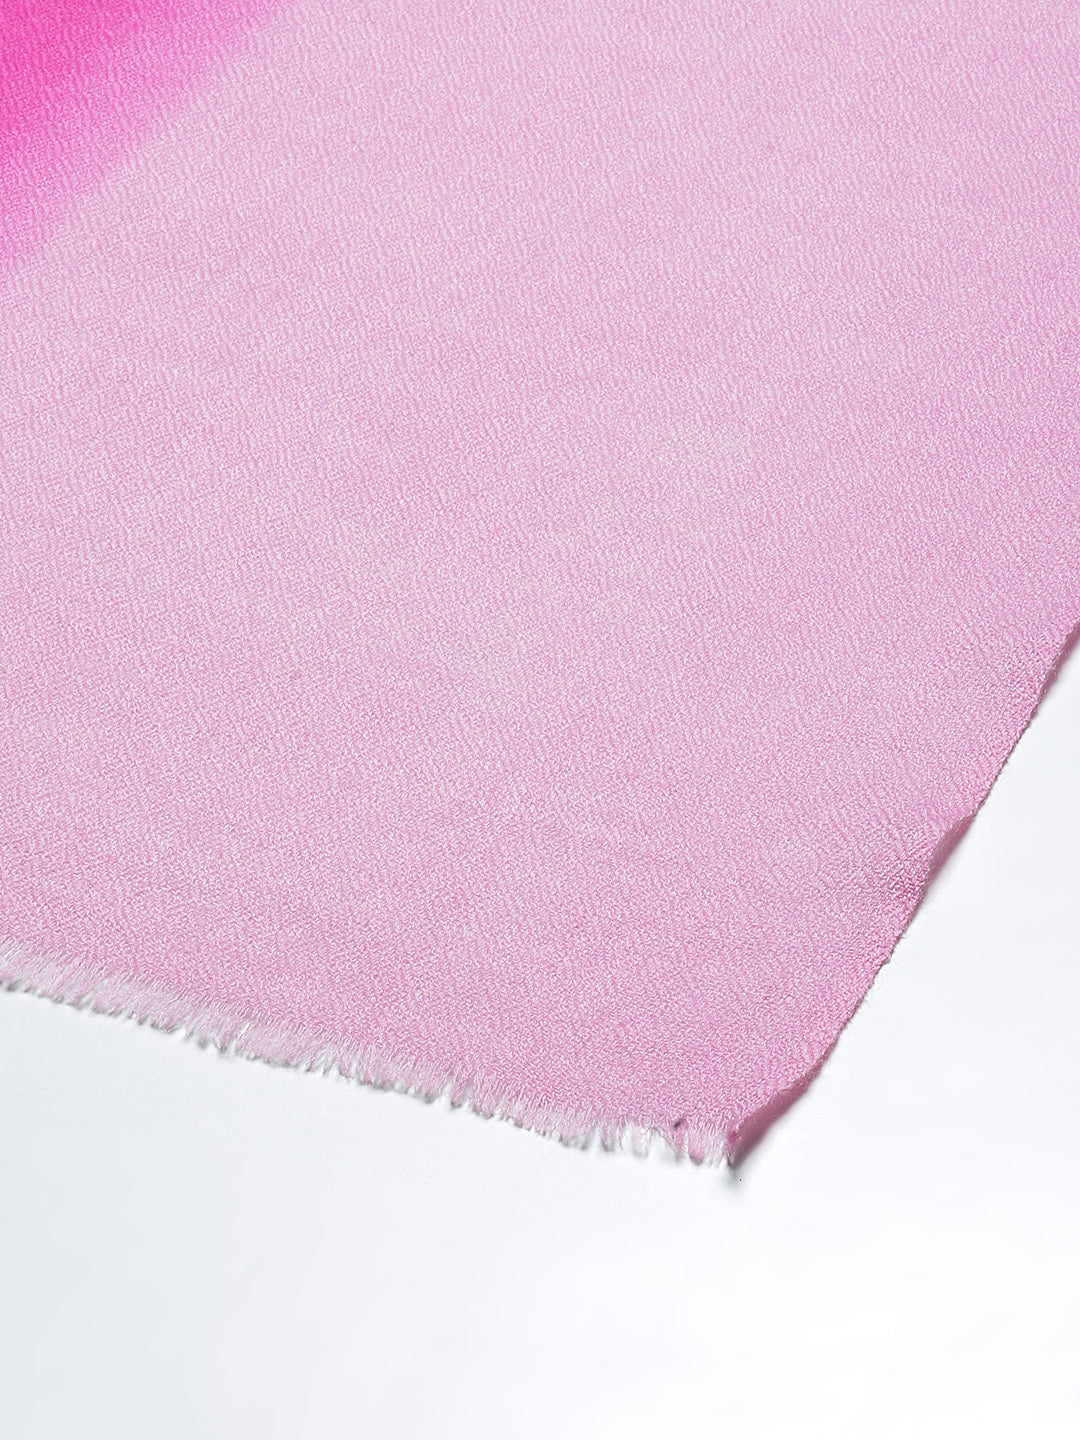 ombre shawl, pink shawl, pink colour shawl